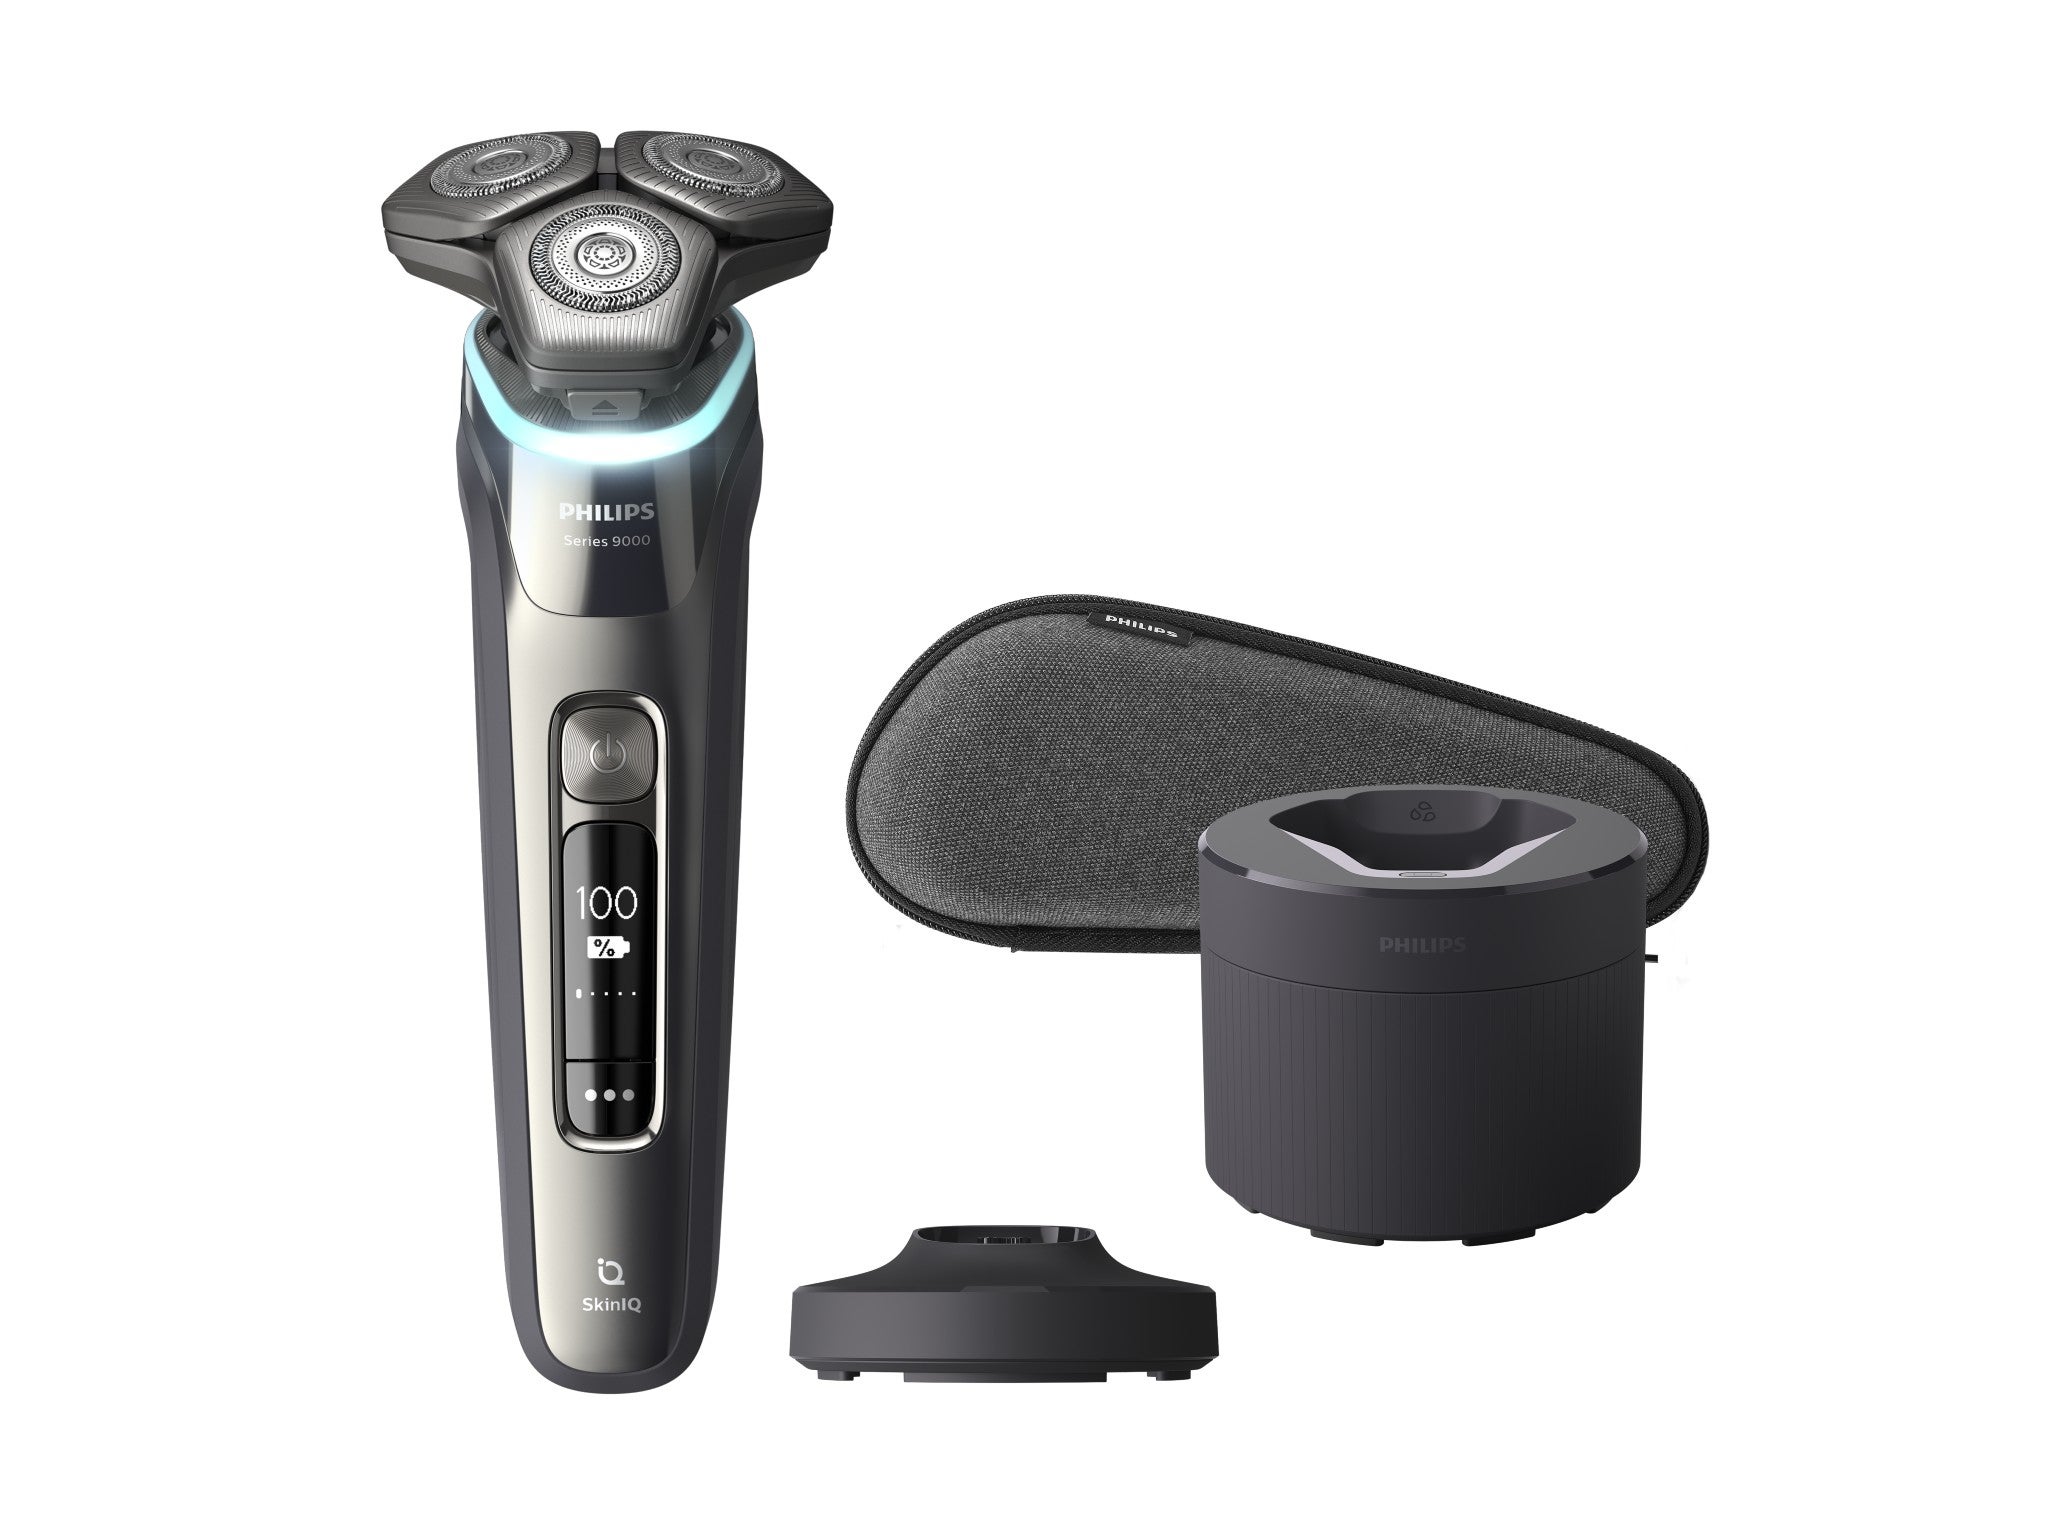 Philips series 9000 series S9987/55 shaver with skin IQ technology indybest